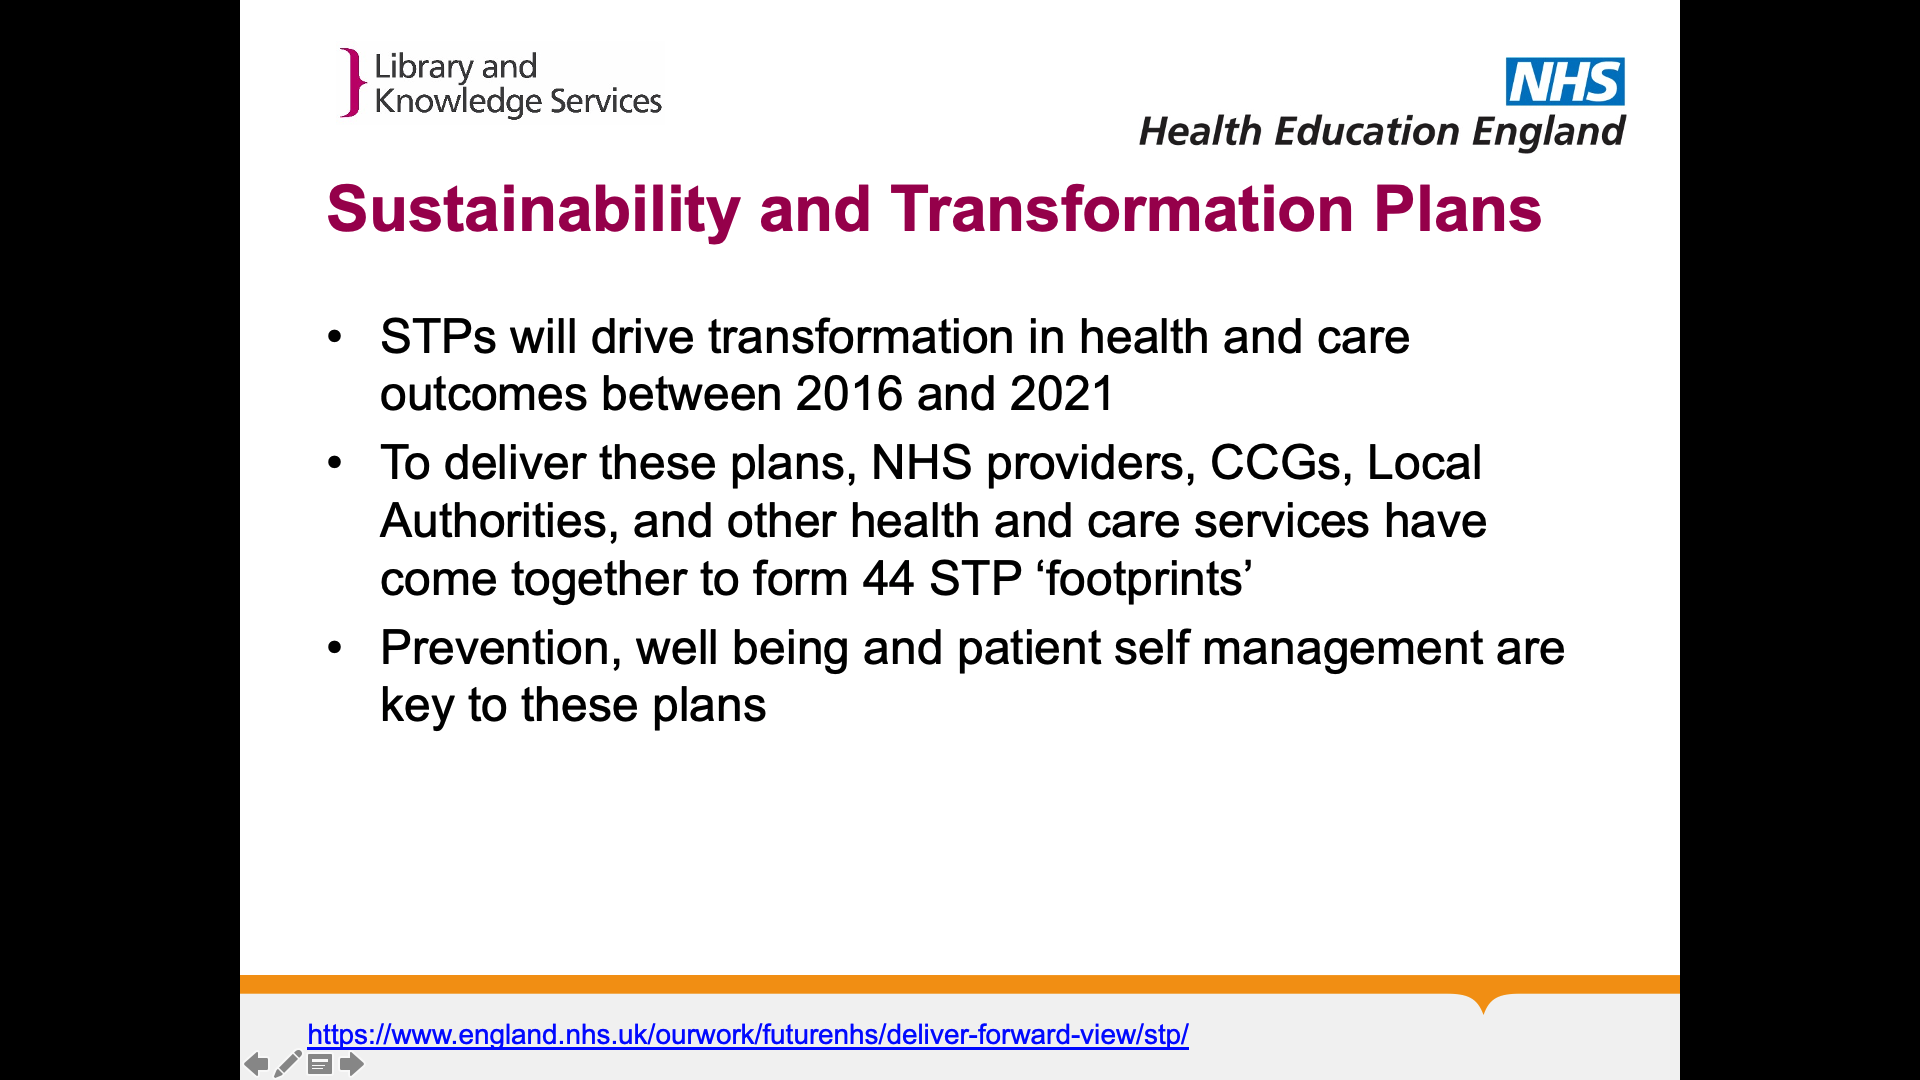 Title: Sustainability and Transformation Plans. Text on page: STPs will drive transformation in health and care outcomes between 2016 and 2021 To deliver these plans, NHS providers, CCGs, Local Authorities, and other health and care services have come together to form 44 STP ‘footprints’ Prevention, well being and patient self management are key to these plans